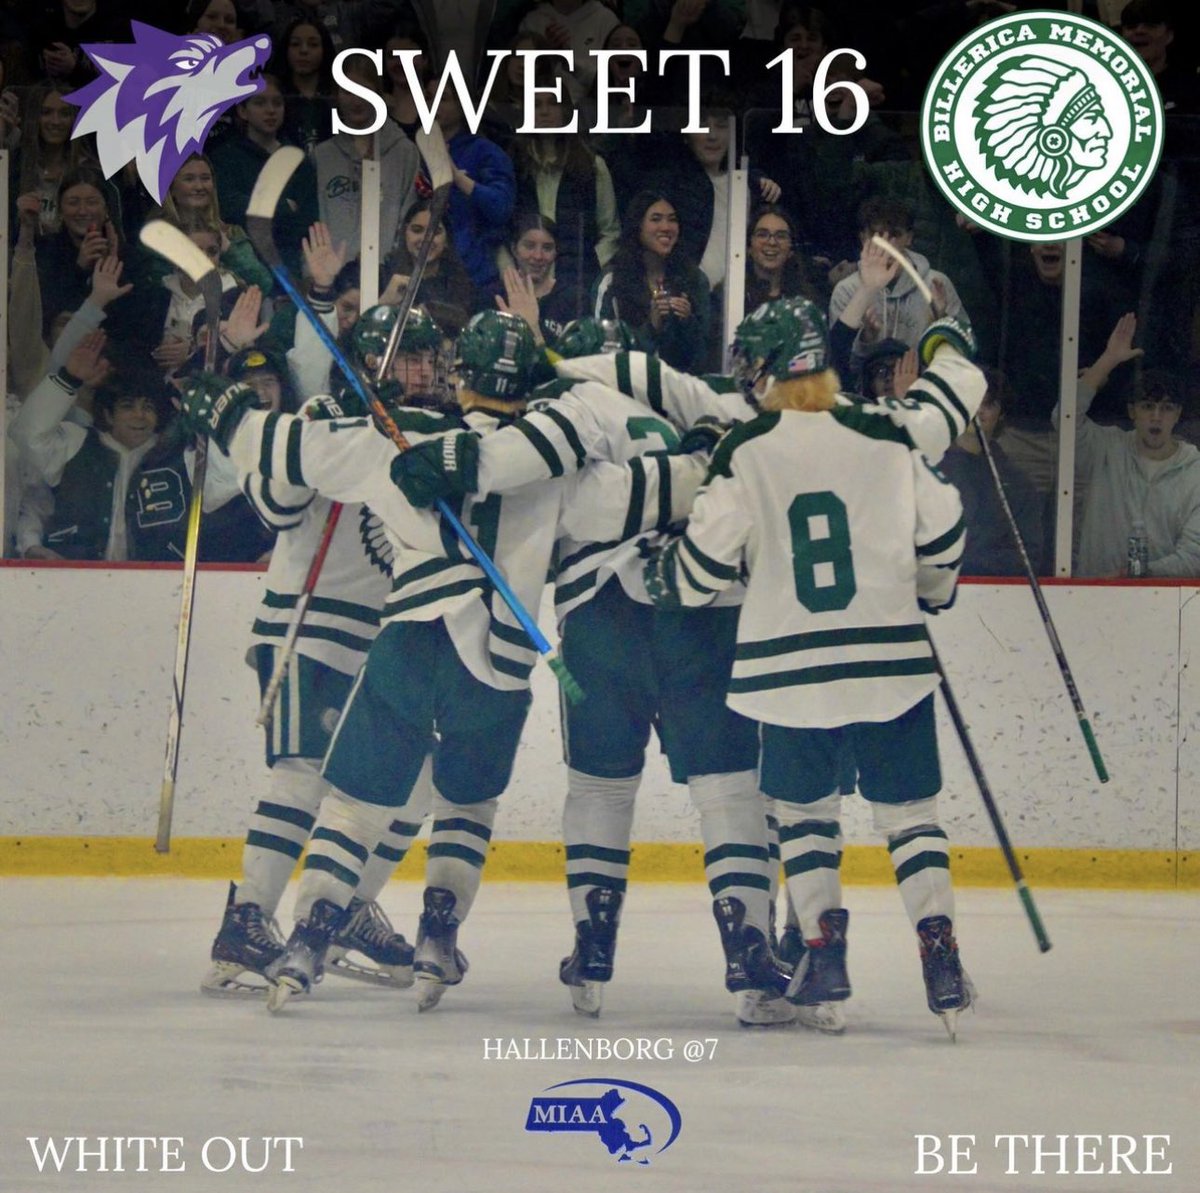 🚨GAME DAY🚨

Sweet 16 matchup for the Indians as we welcome in No. 11 Boston Latin to the Hallenborg

Billerica vs Boston Latin
Hallenborg @ 7:30
Tickets on GoFan.com

LETS GO

@BMHSAthletics @IndianPride2024 @T_Mulherin @MassHSHockey @HNIBonline @MassNZ